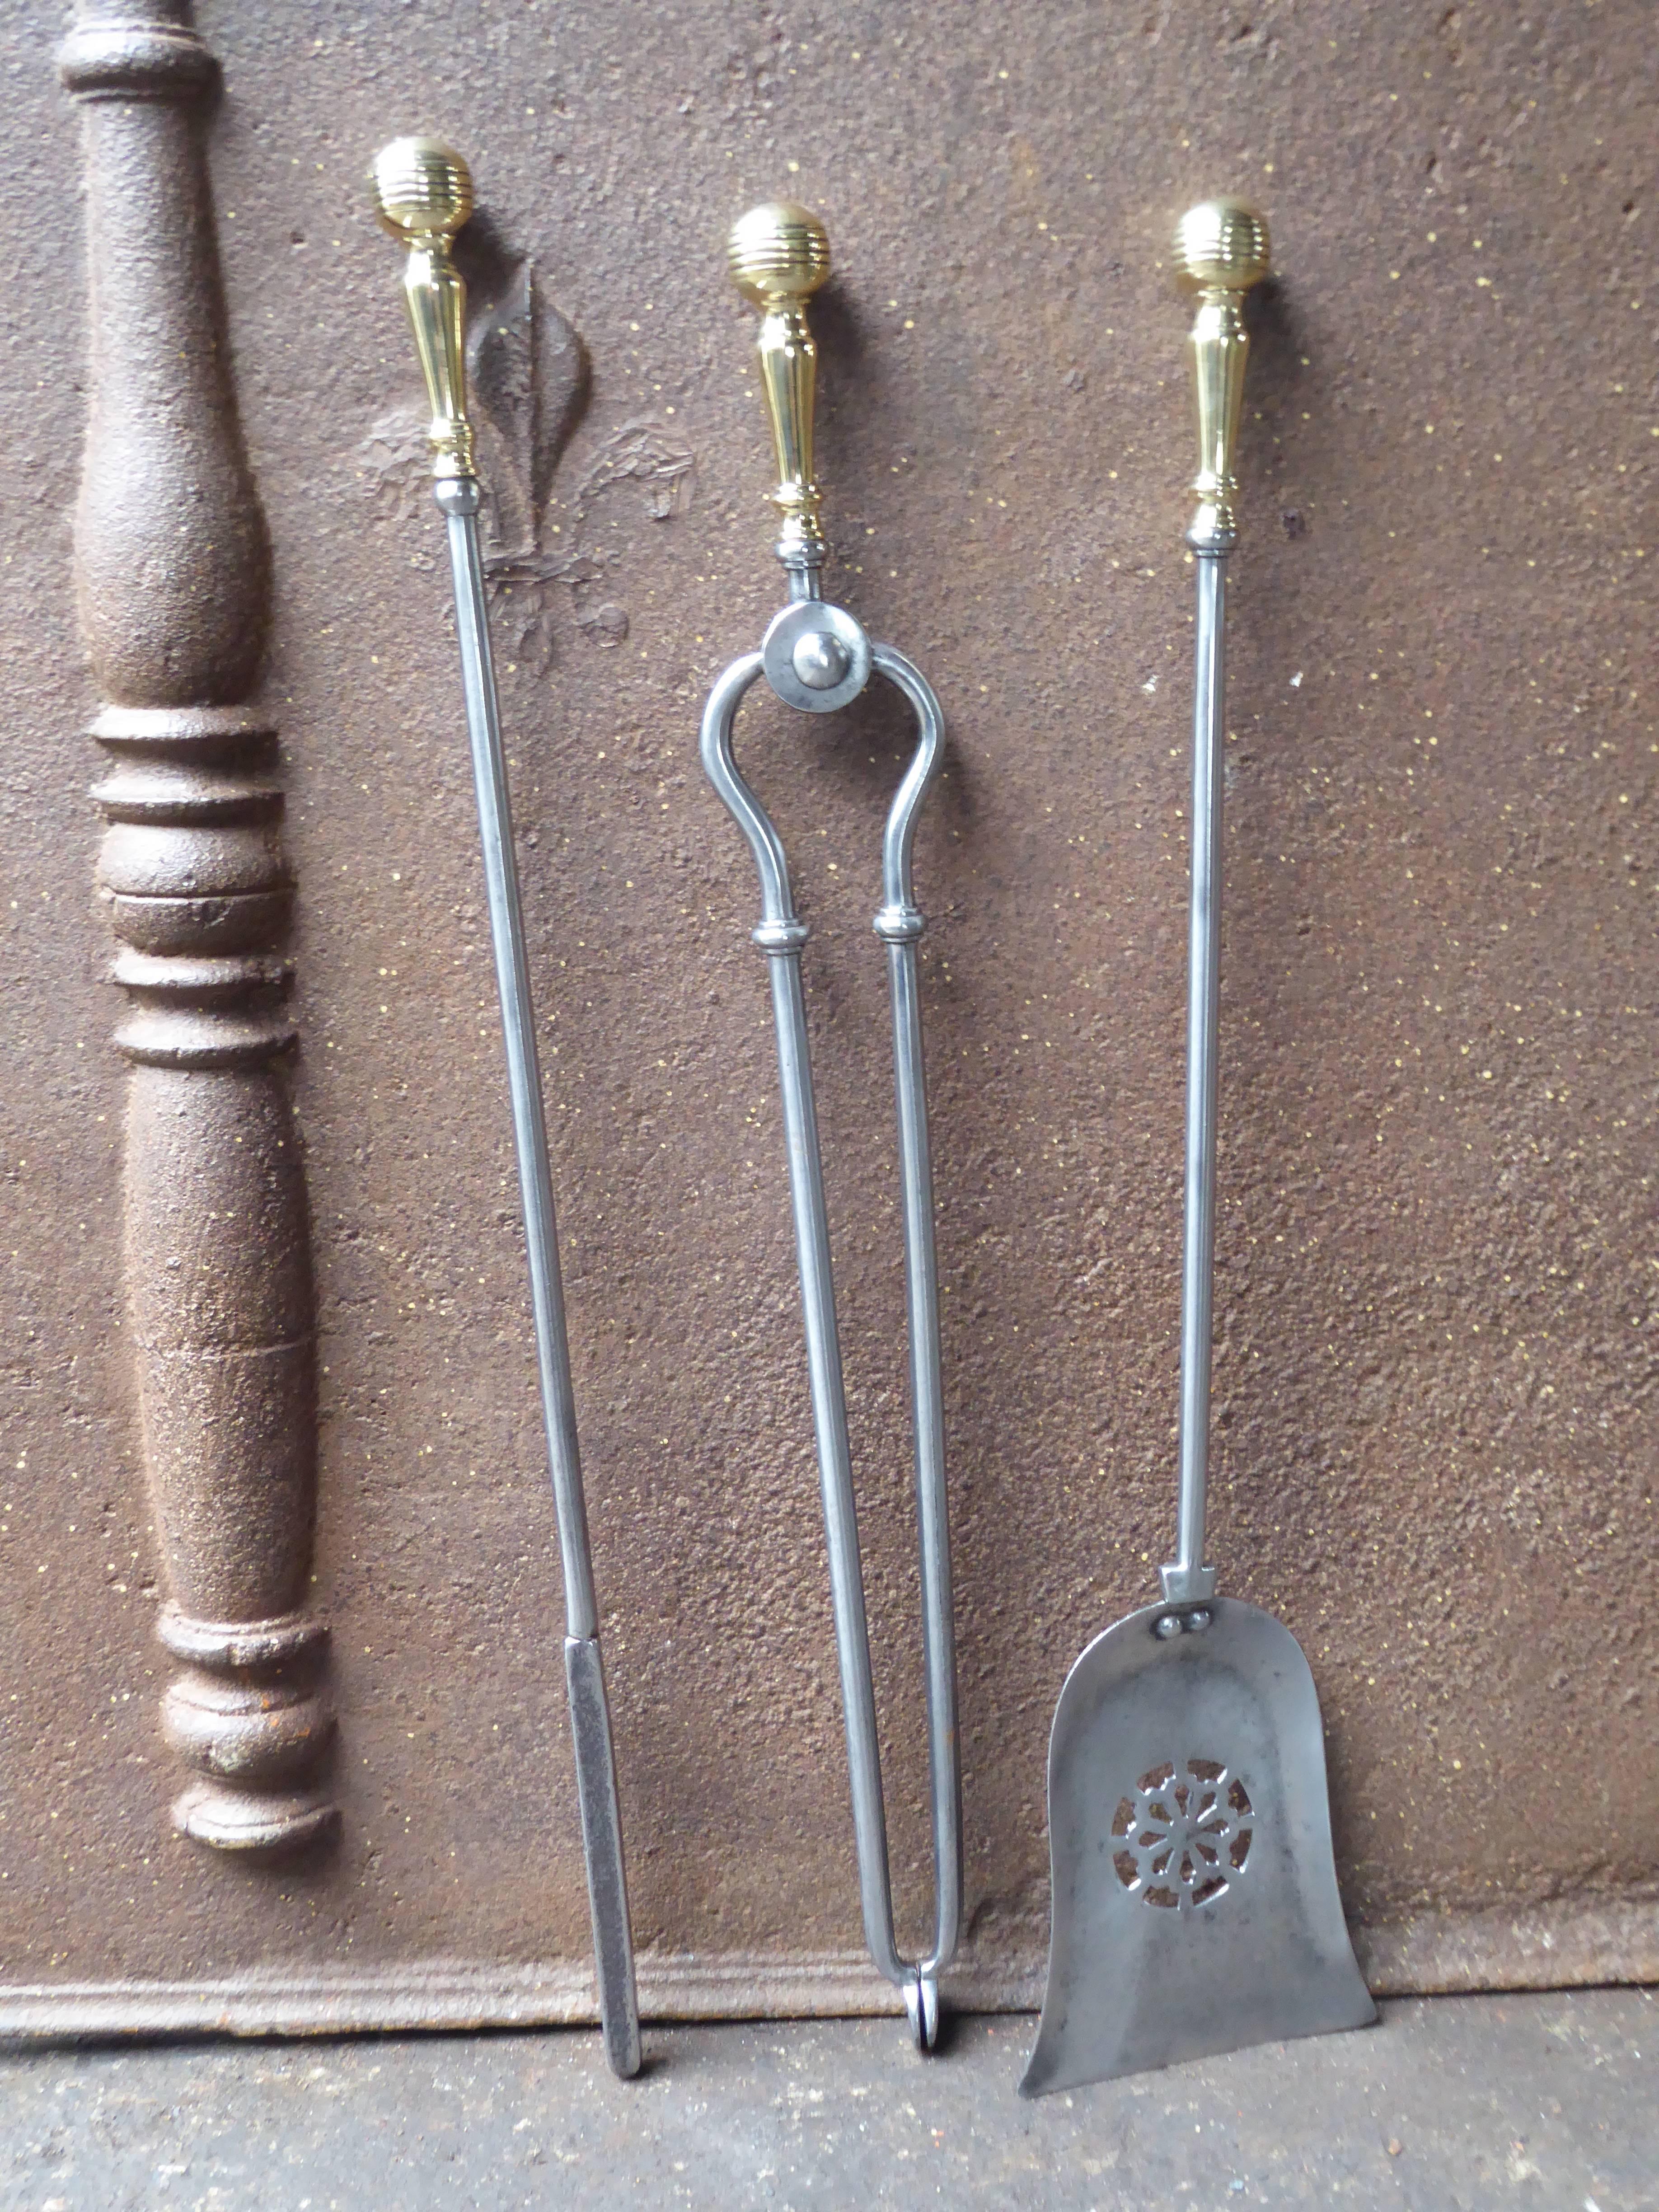 19th century English Victorian period fireplace tool set - fire irons made of polished steel and polished brass. The toolset is in a good condition.

